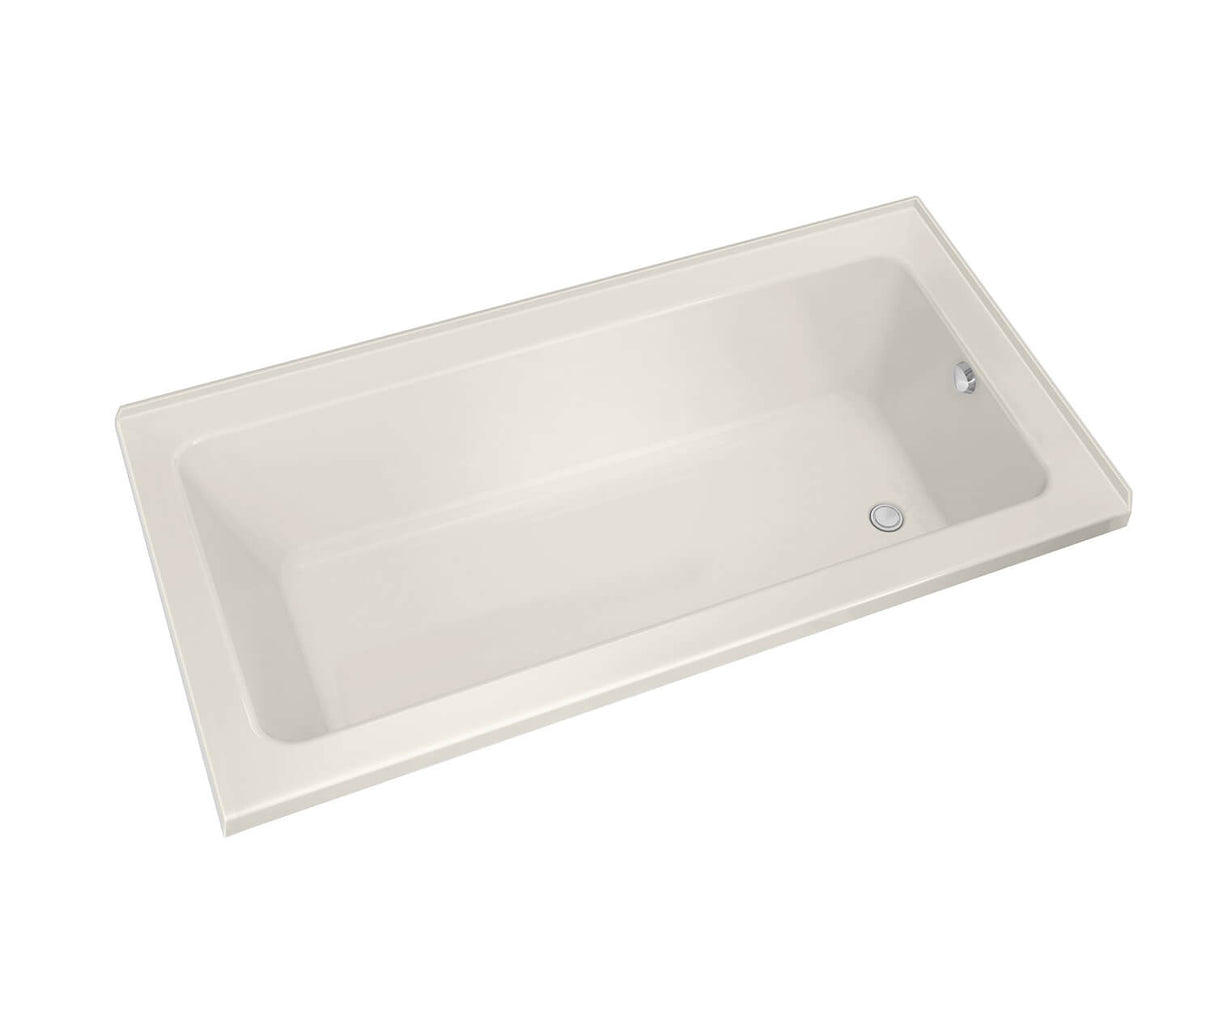 MAAX 106215-L-000-007 Pose 7242 IF Acrylic Corner Right Left-Hand Drain Bathtub in Biscuit